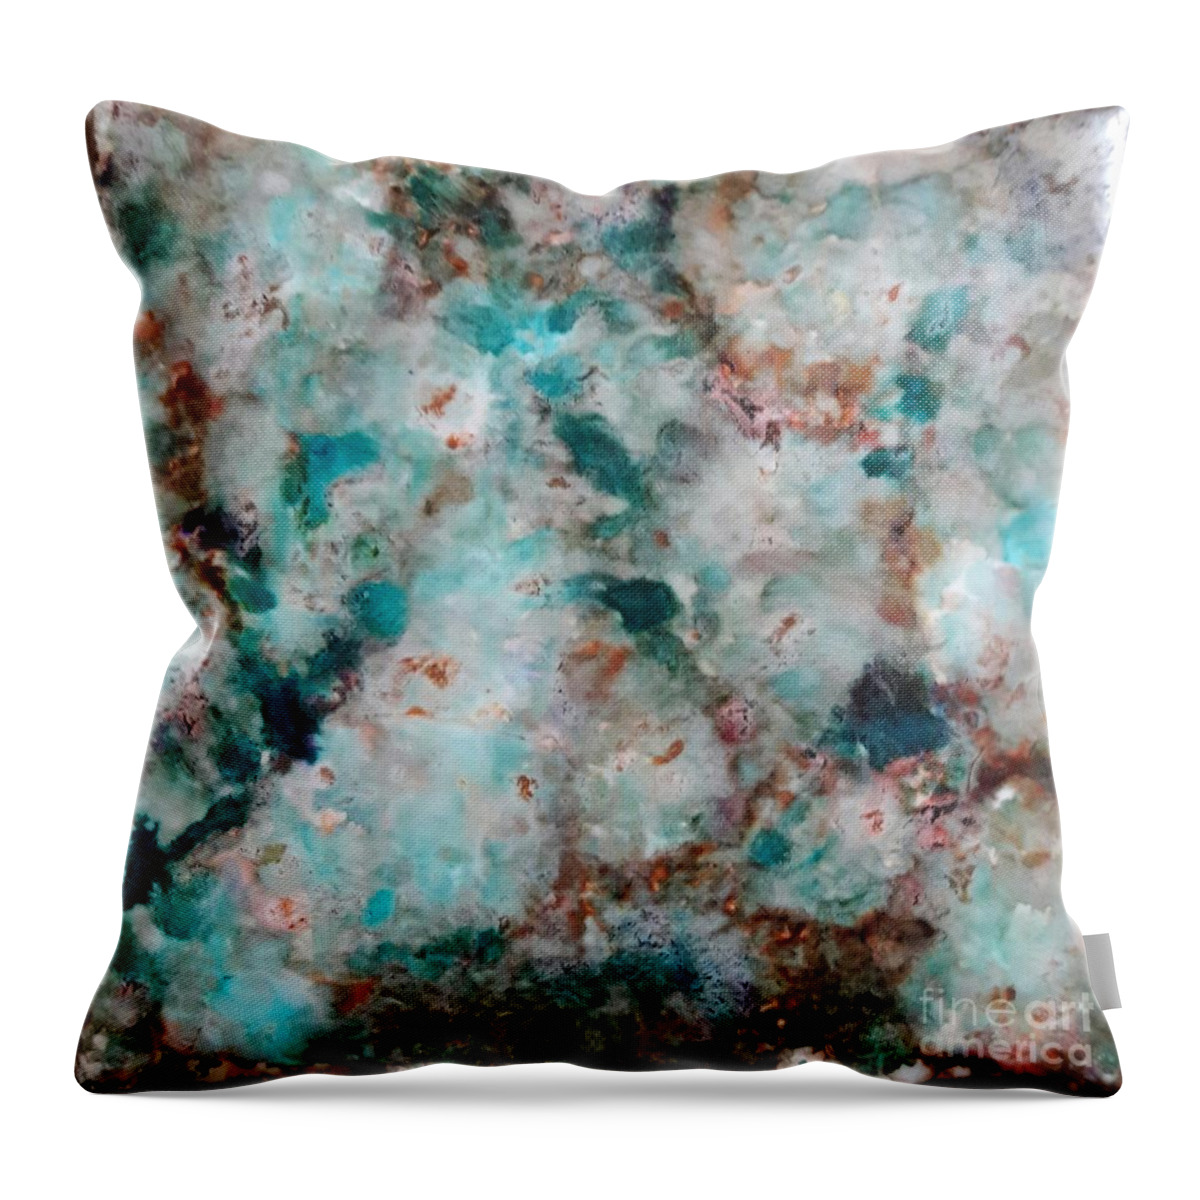 Alcohol Throw Pillow featuring the painting Teal Chips by Terri Mills